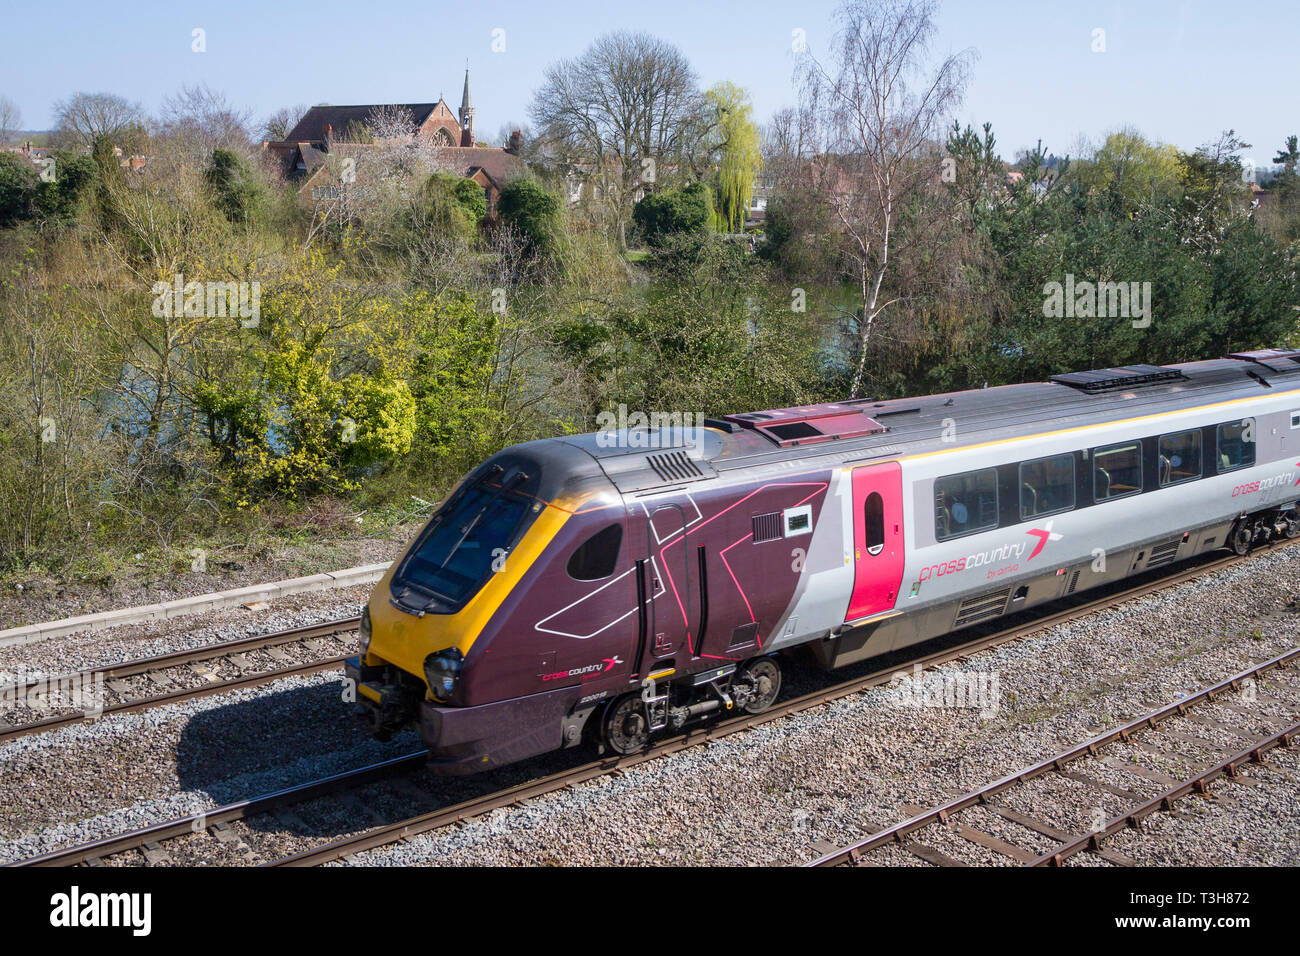 A Class 220 Voyager high speed train operated by CrossCountry Trains at Hinksey, Oxford Stock Photo